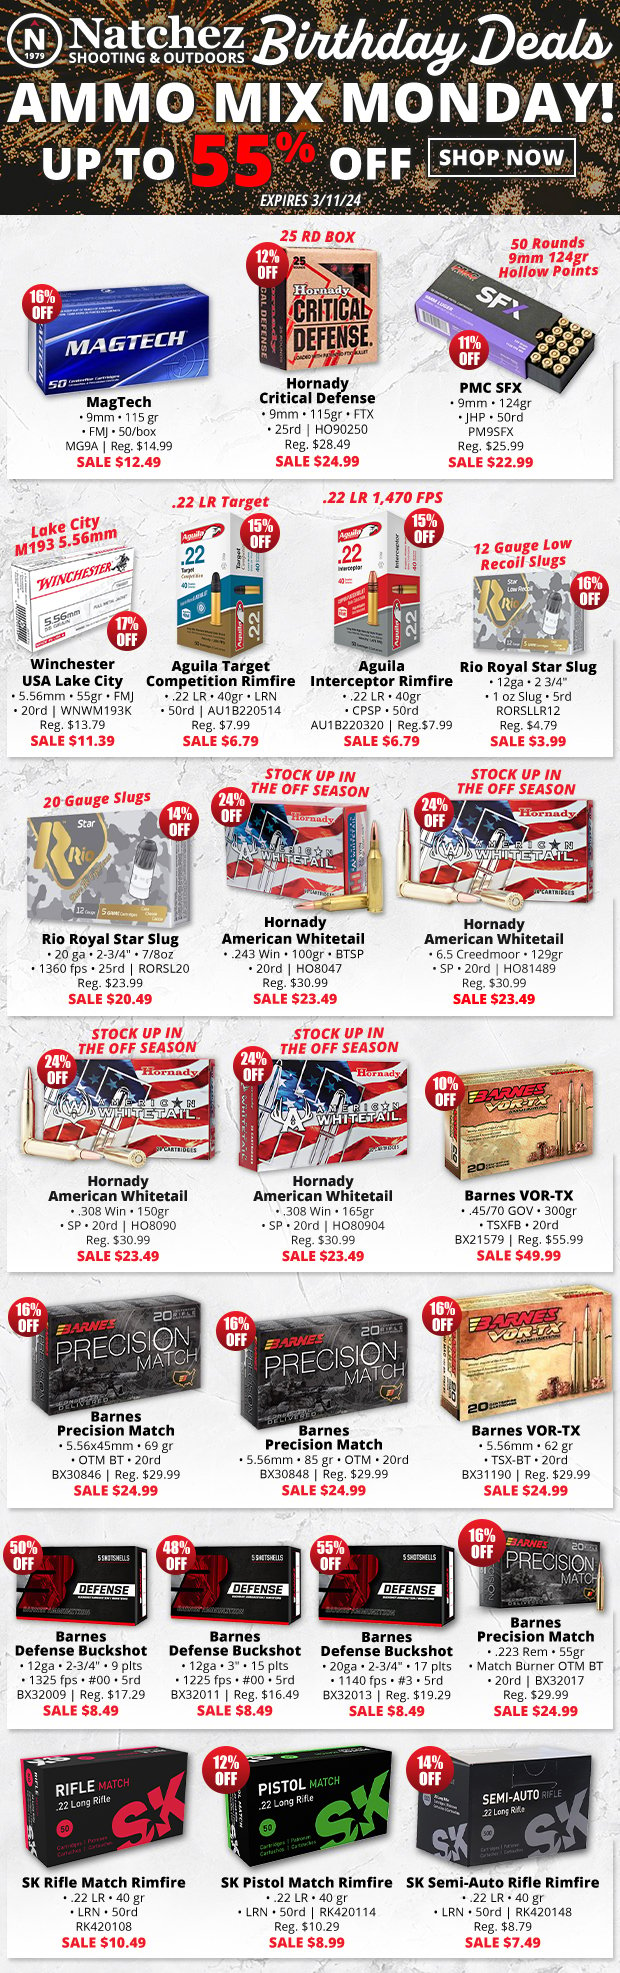 Up to 55% Off Ammo with Natchez Birthday Deals!